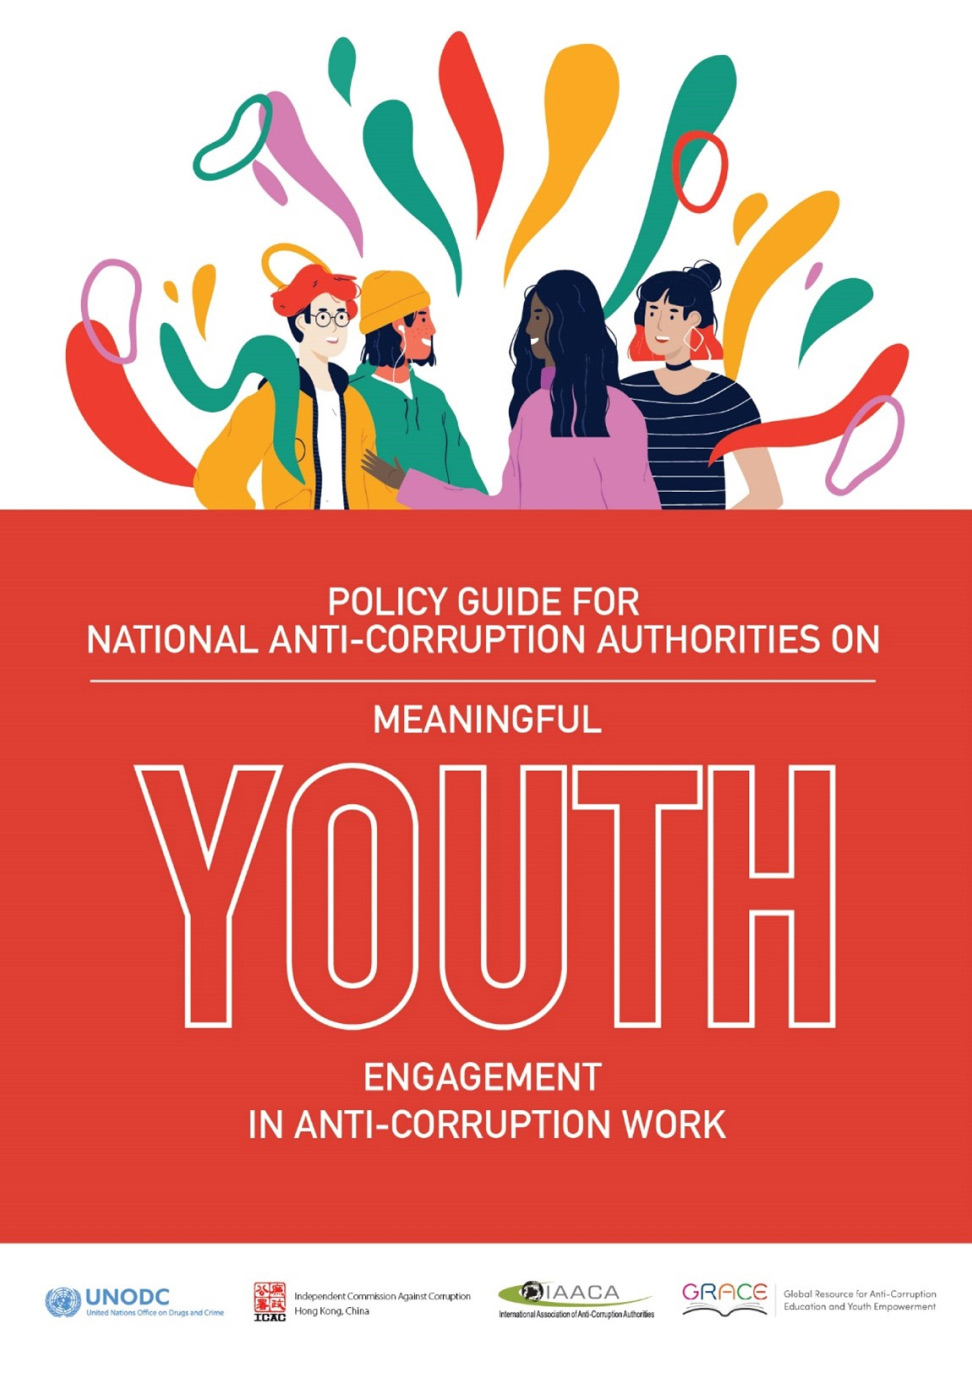 Policy Guide on Meaningful Youth Engagement Launched